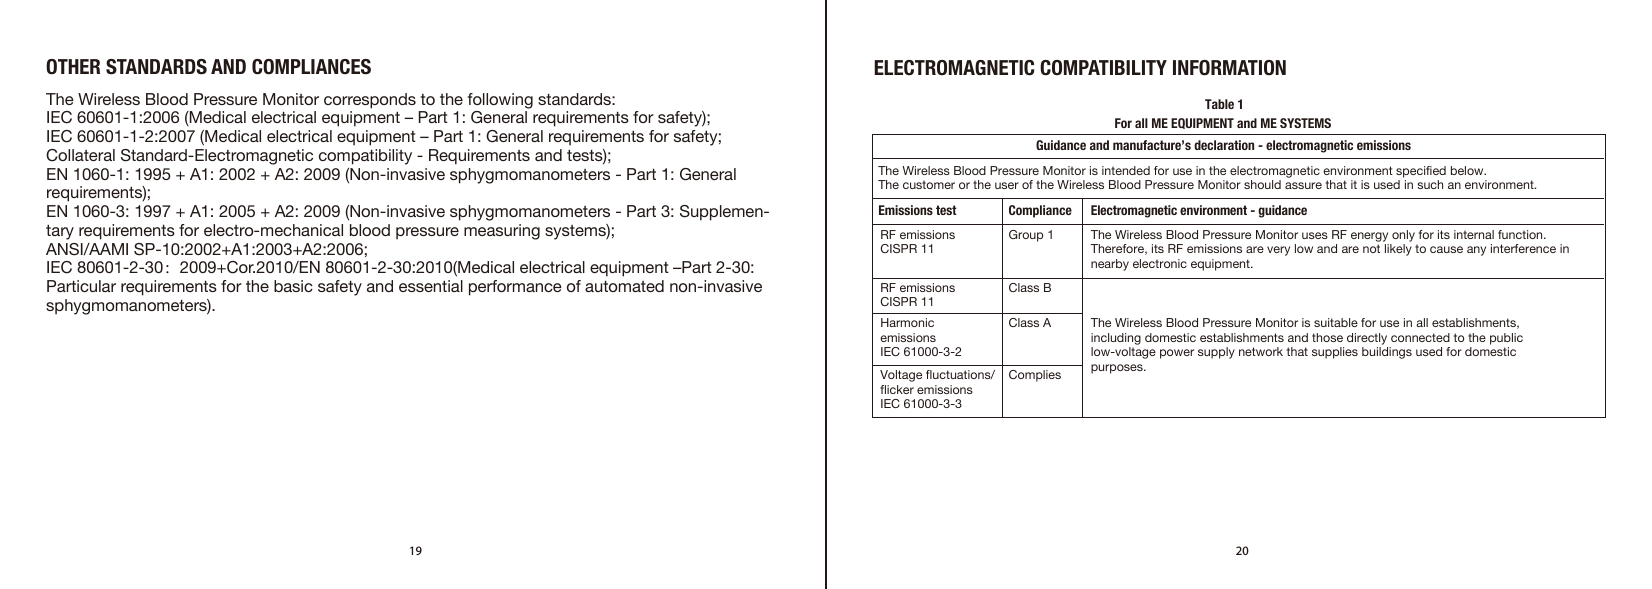 19 20OTHER STANDARDS AND COMPLIANCES ELECTROMAGNETIC COMPATIBILITY INFORMATIONThe Wireless Blood Pressure Monitor corresponds to the following standards: IEC 60601-1:2006 (Medical electrical equipment – Part 1: General requirements for safety); IEC 60601-1-2:2007 (Medical electrical equipment – Part 1: General requirements for safety; Collateral Standard-Electromagnetic compatibility - Requirements and tests); EN 1060-1: 1995 + A1: 2002 + A2: 2009 (Non-invasive sphygmomanometers - Part 1: General requirements);EN 1060-3: 1997 + A1: 2005 + A2: 2009 (Non-invasive sphygmomanometers - Part 3: Supplemen-tary requirements for electro-mechanical blood pressure measuring systems); ANSI/AAMI SP-10:2002+A1:2003+A2:2006;IEC 80601-2-30：2009+Cor.2010/EN 80601-2-30:2010(Medical electrical equipment –Part 2-30: Particular requirements for the basic safety and essential performance of automated non-invasive sphygmomanometers).For all ME EQUIPMENT and ME SYSTEMSEmissions test Compliance Electromagnetic environment - guidanceRF emissionsCISPR 11RF emissionsCISPR 11Harmonic emissionsIEC 61000-3-2Voltage fluctuations/flicker emissionsIEC 61000-3-3Group 1Class BClass ACompliesThe Wireless Blood Pressure Monitor uses RF energy only for its internal function. Therefore, its RF emissions are very low and are not likely to cause any interference in nearby electronic equipment.The Wireless Blood Pressure Monitor is suitable for use in all establishments, including domestic establishments and those directly connected to the public low-voltage power supply network that supplies buildings used for domestic purposes.The Wireless Blood Pressure Monitor is intended for use in the electromagnetic environment specified below.The customer or the user of the Wireless Blood Pressure Monitor should assure that it is used in such an environment.Guidance and manufacture’s declaration - electromagnetic emissionsTable 1